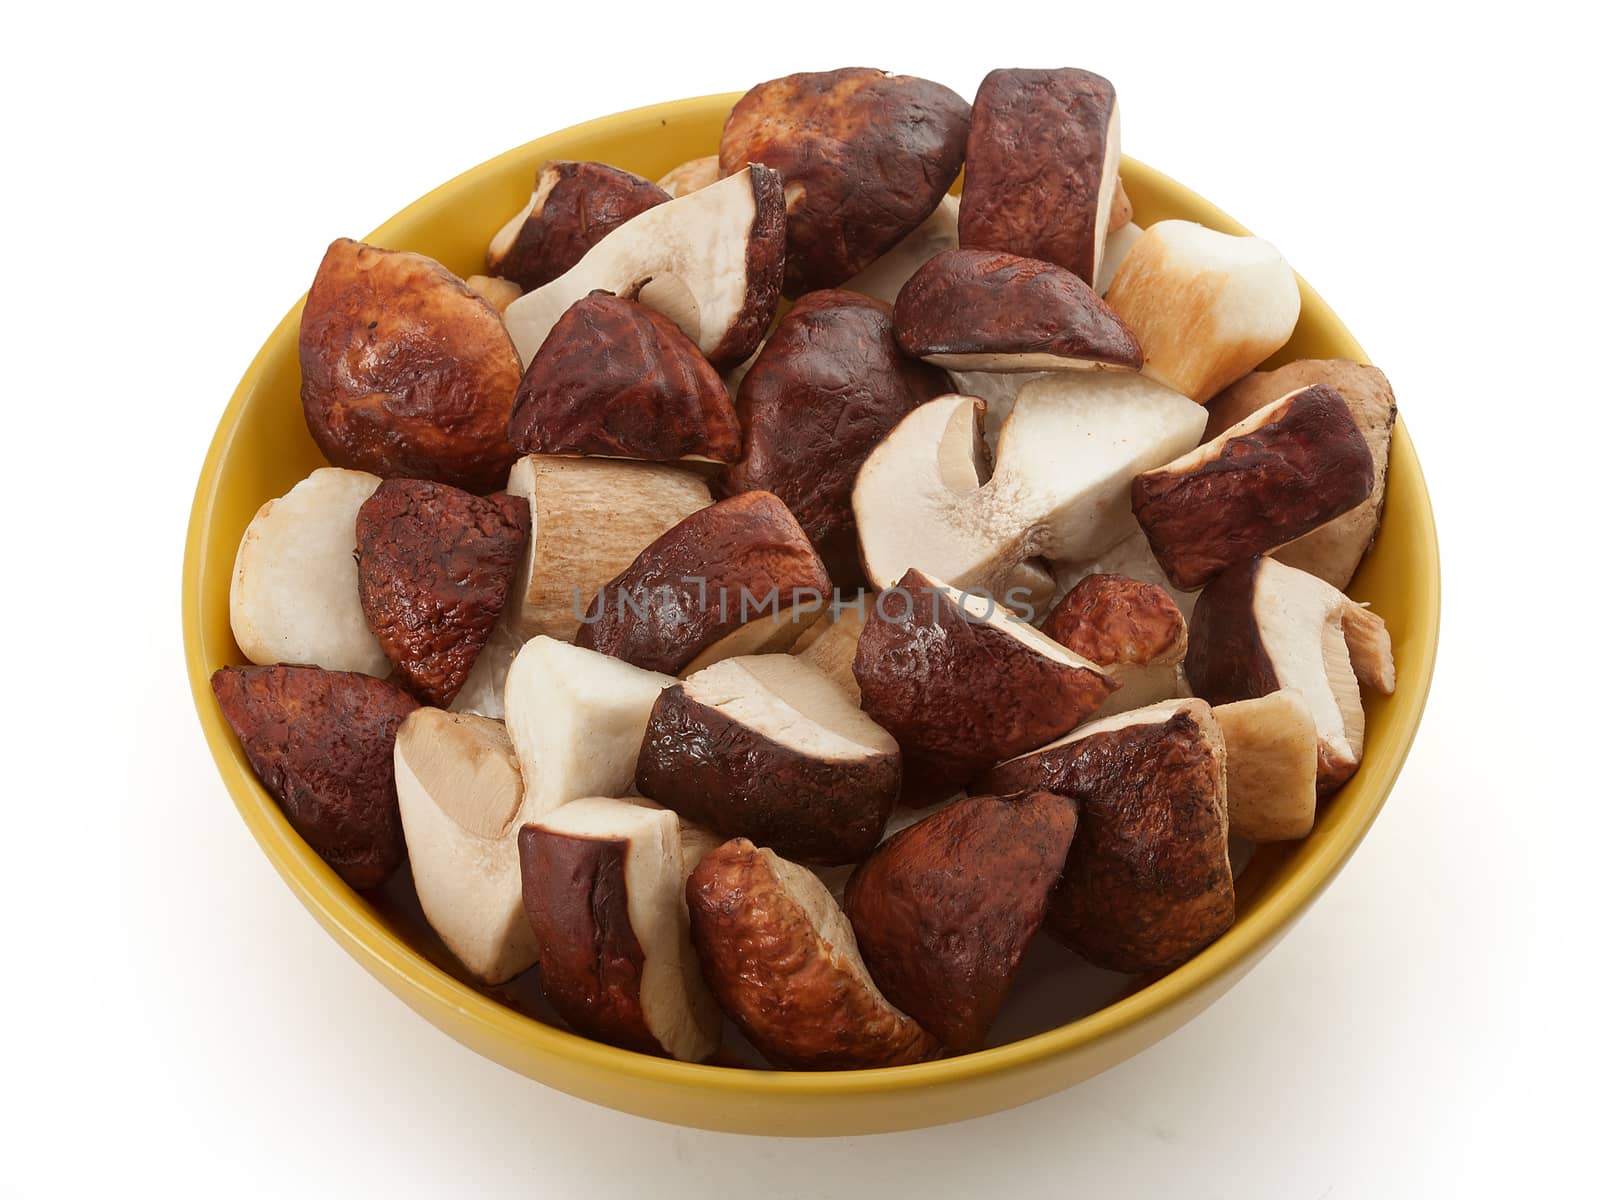 Pieces of white mushrooms in the yellow bowl